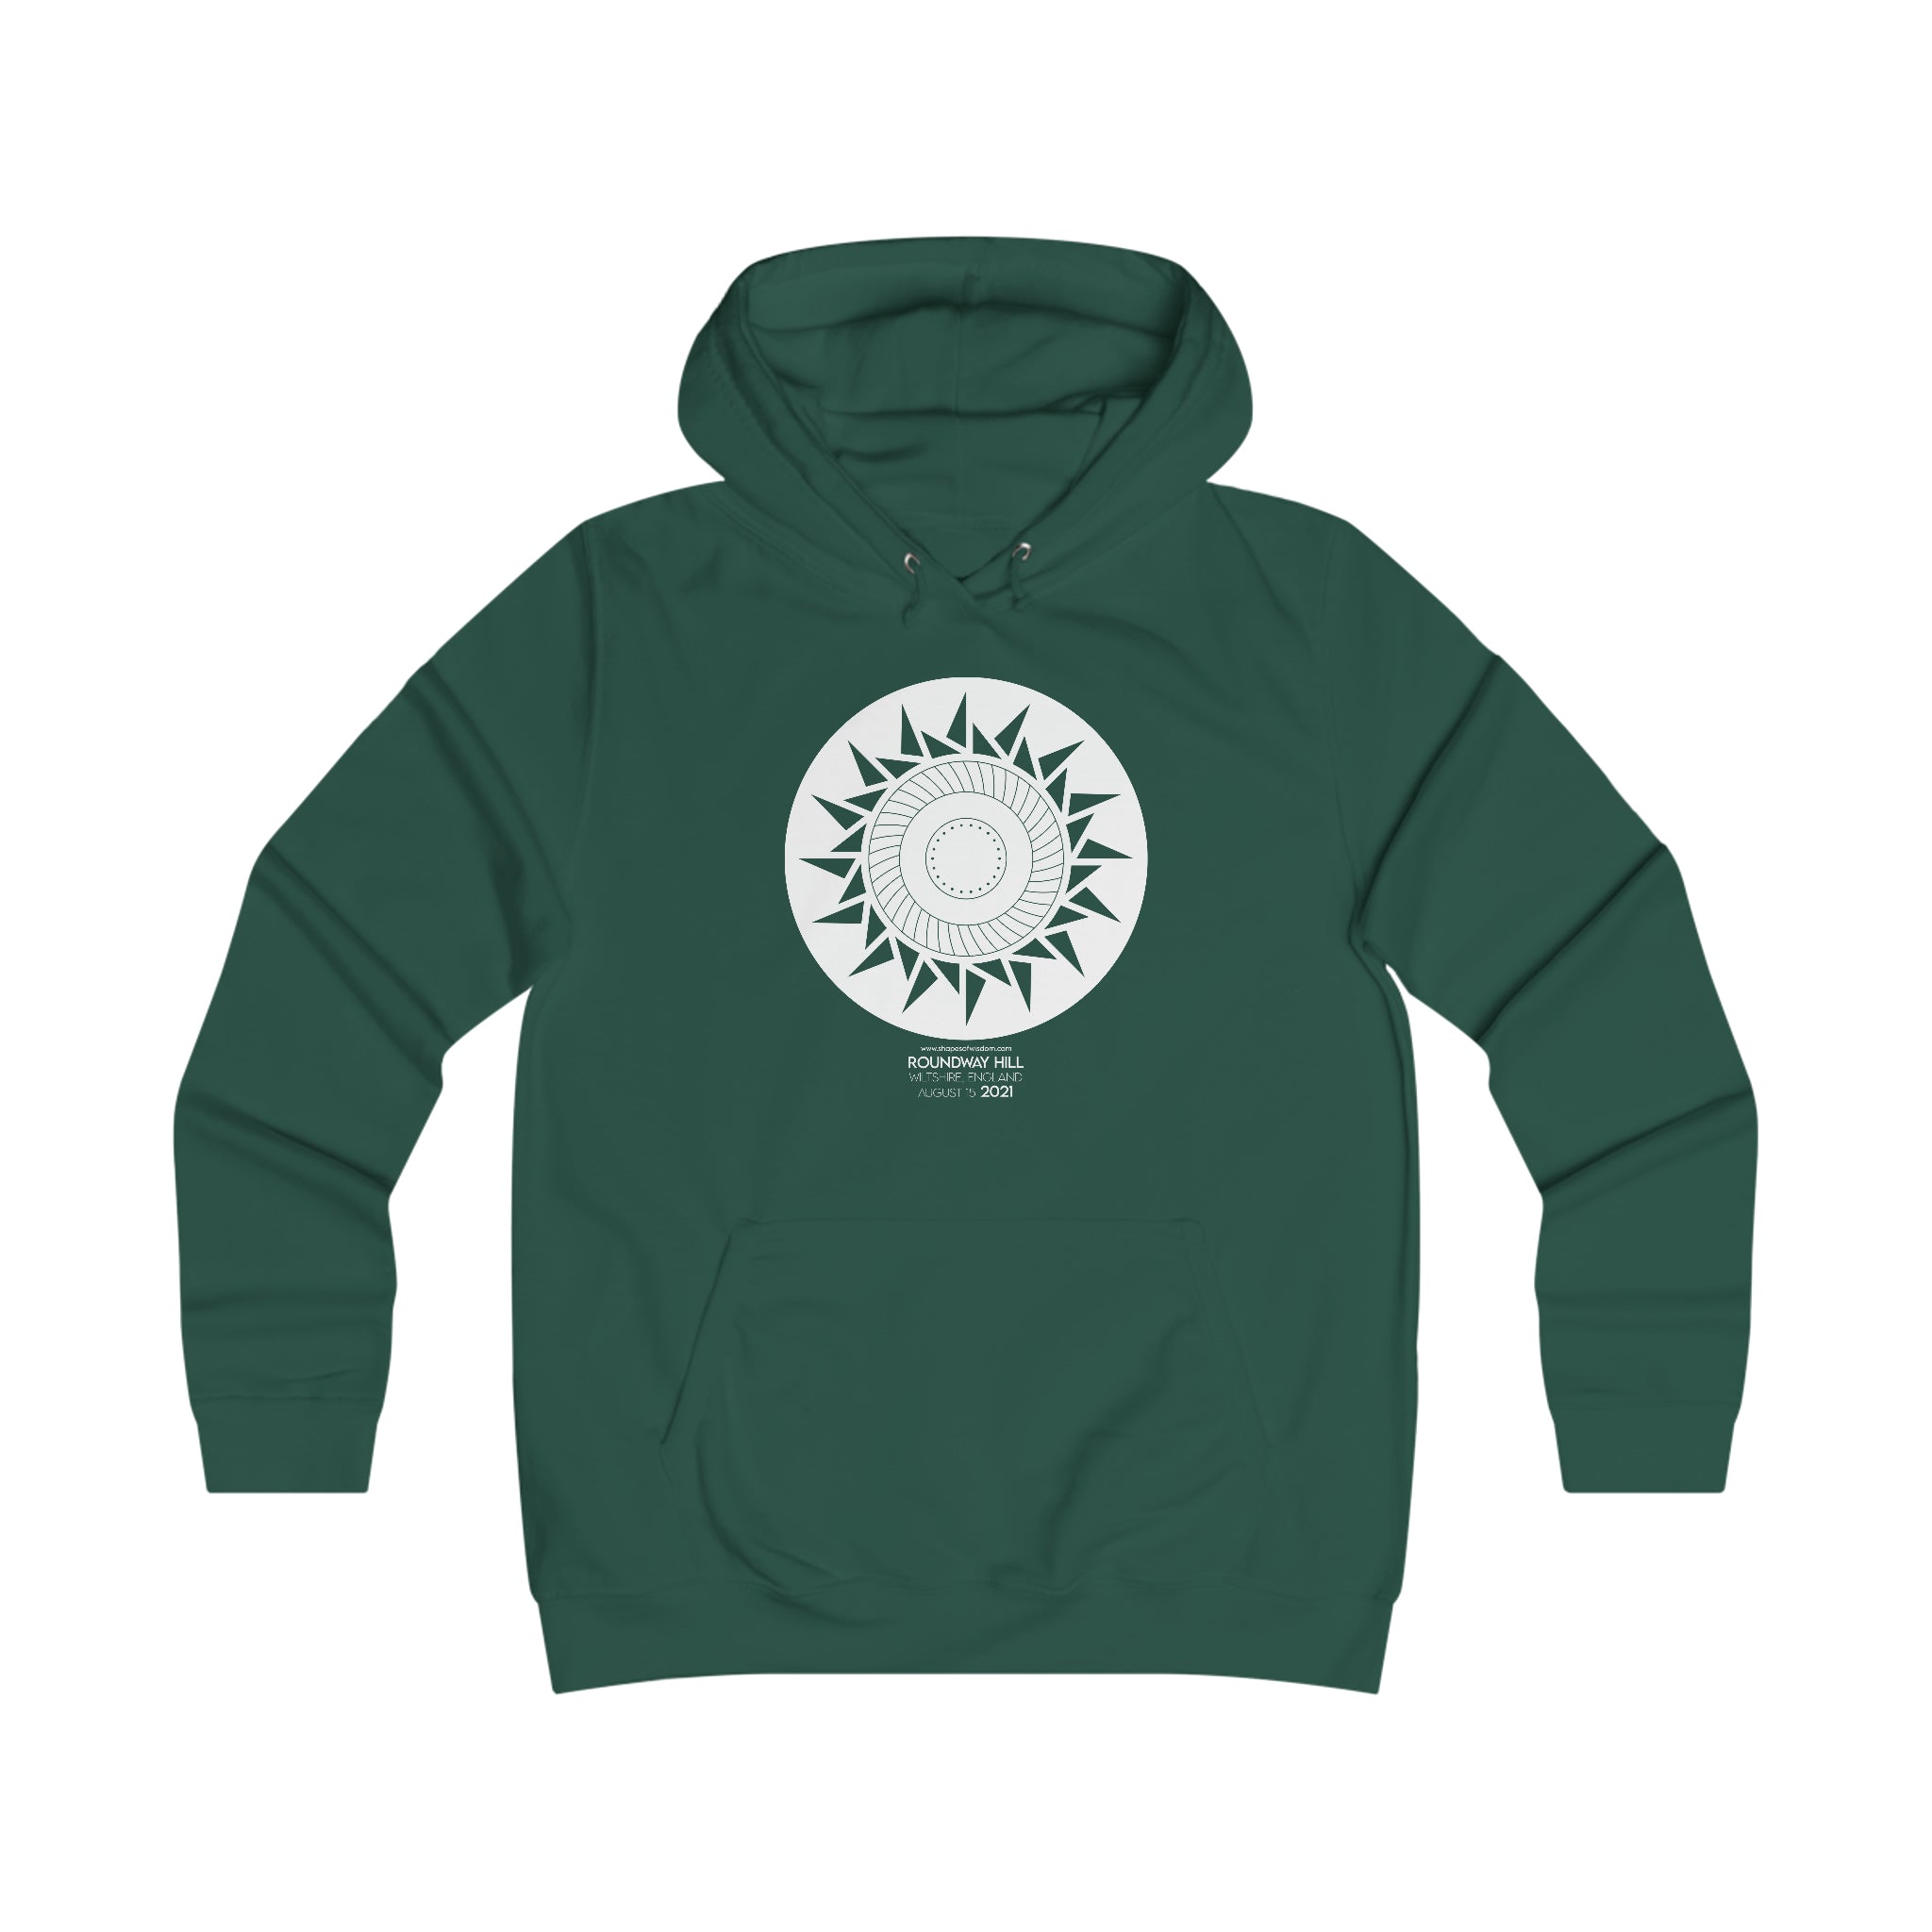 Crop Circle Girl College Hoodie - Roundway Hill 7